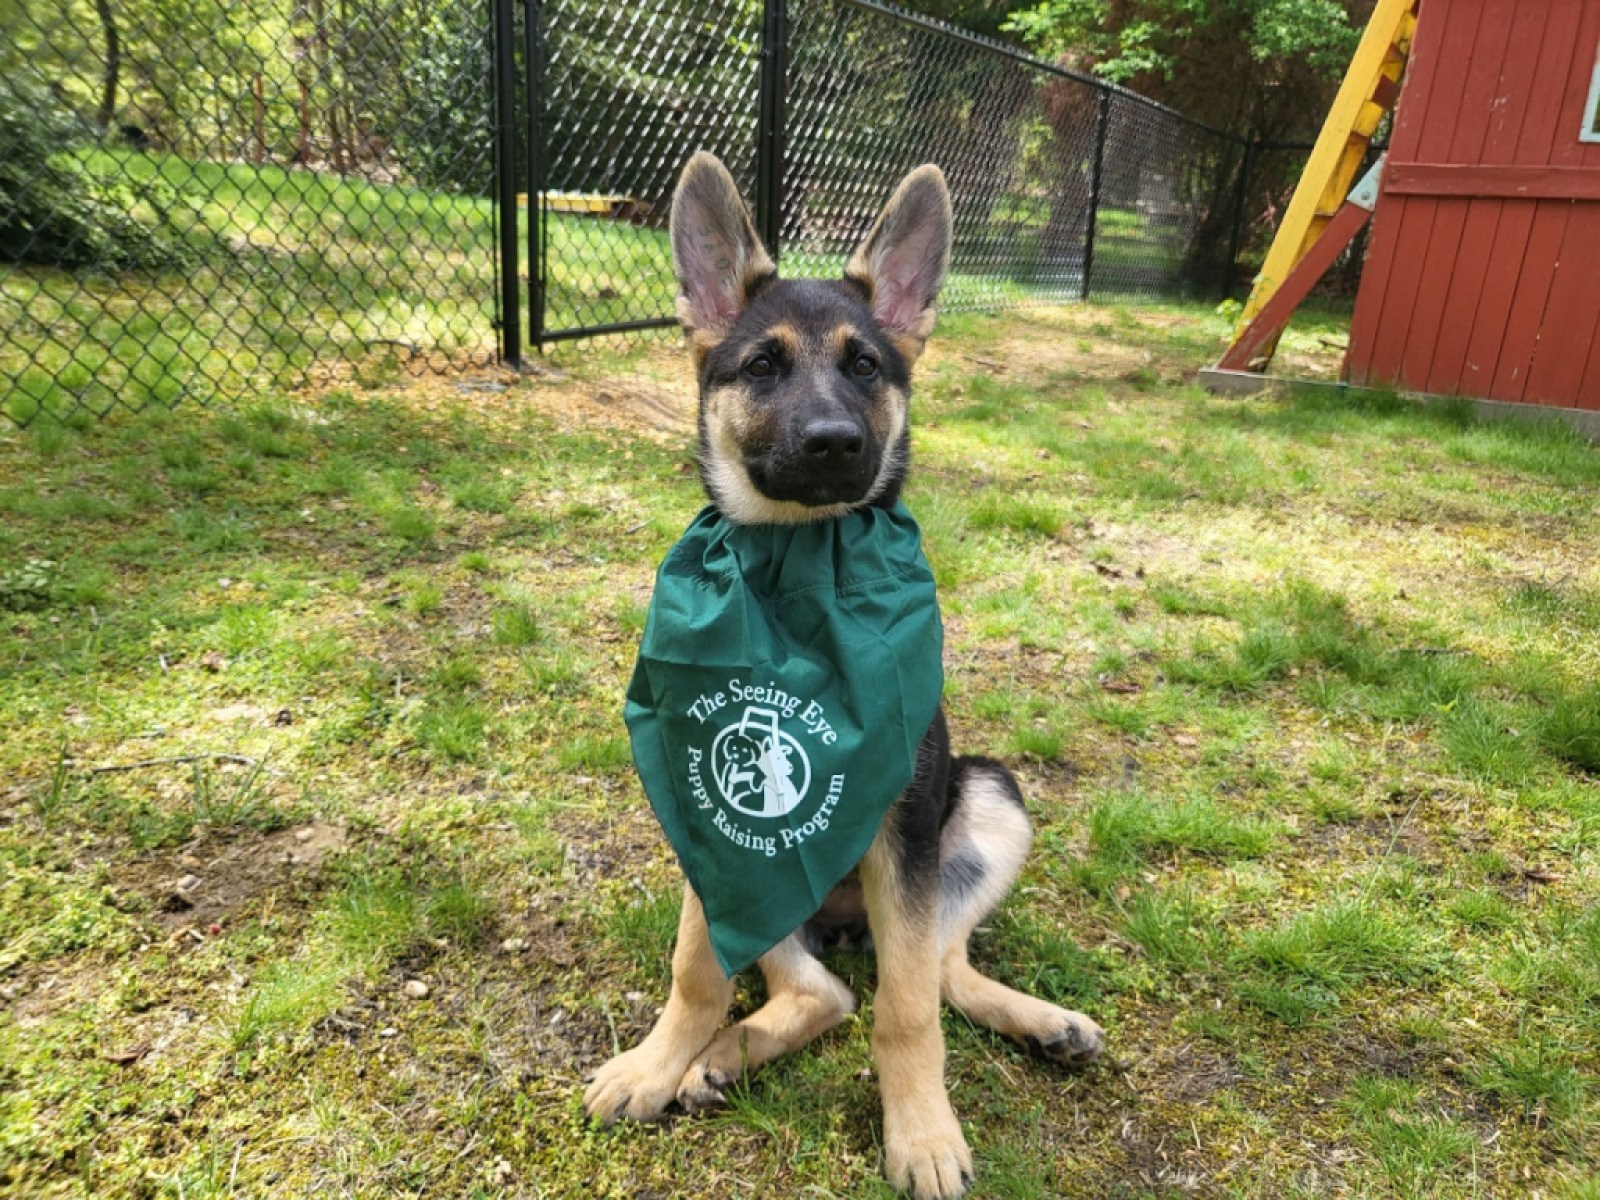 A German Shepard named Octo sits in green grass wearing a green scarf that says “The Seeing Eye Puppy Raising Program.” She is sitting tall in a backyard with a black fence and a red shed behind her.